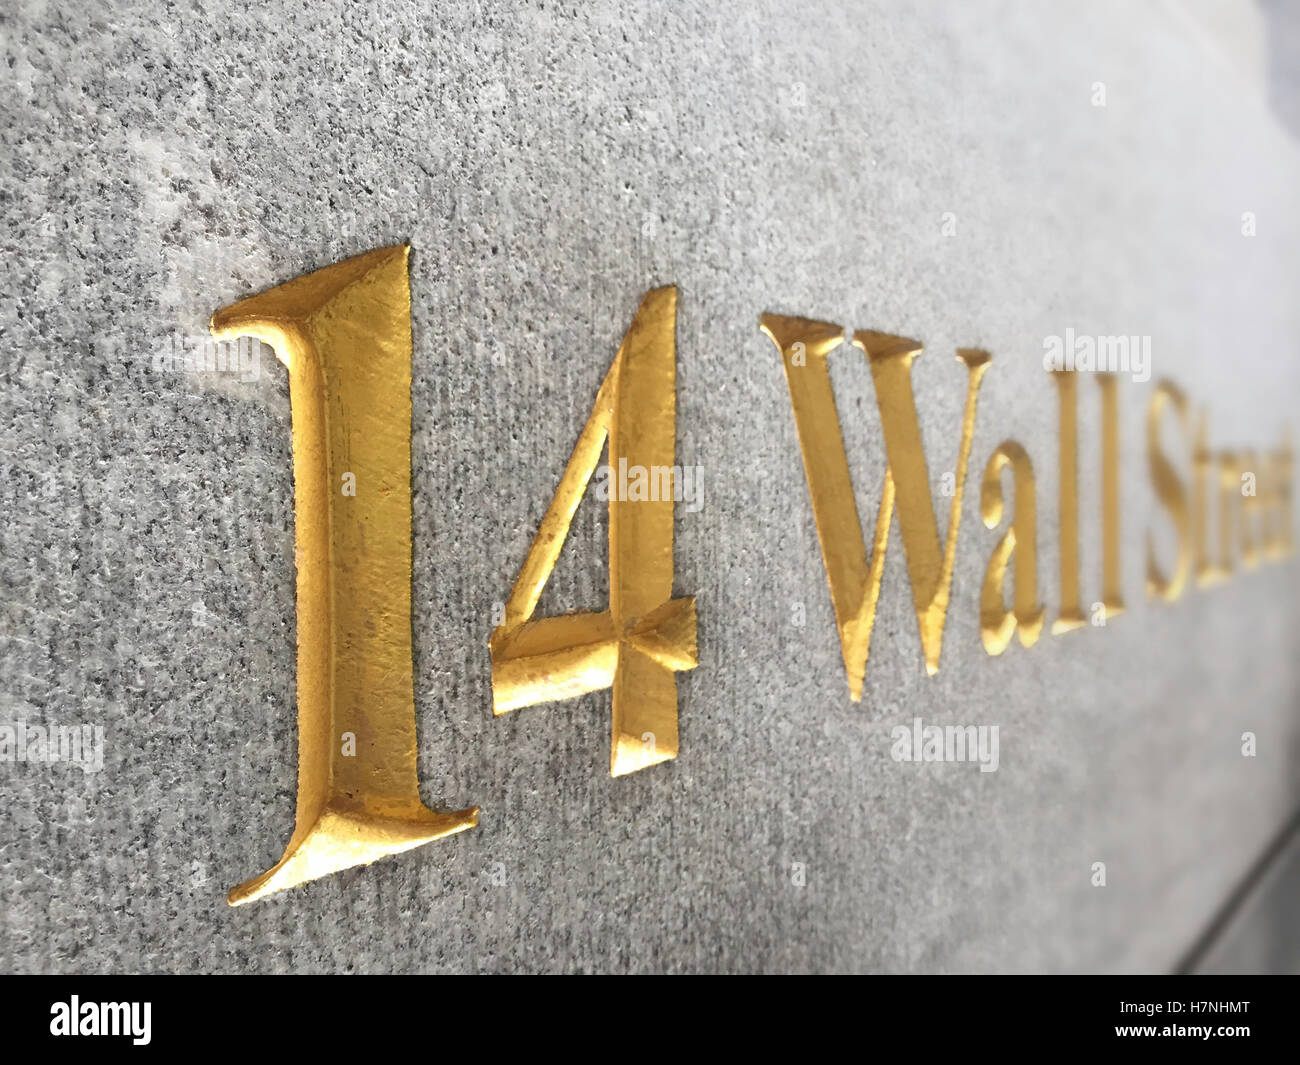 Gold etched lettering marking 14 Wall Street, financial district, NYC Stock Photo